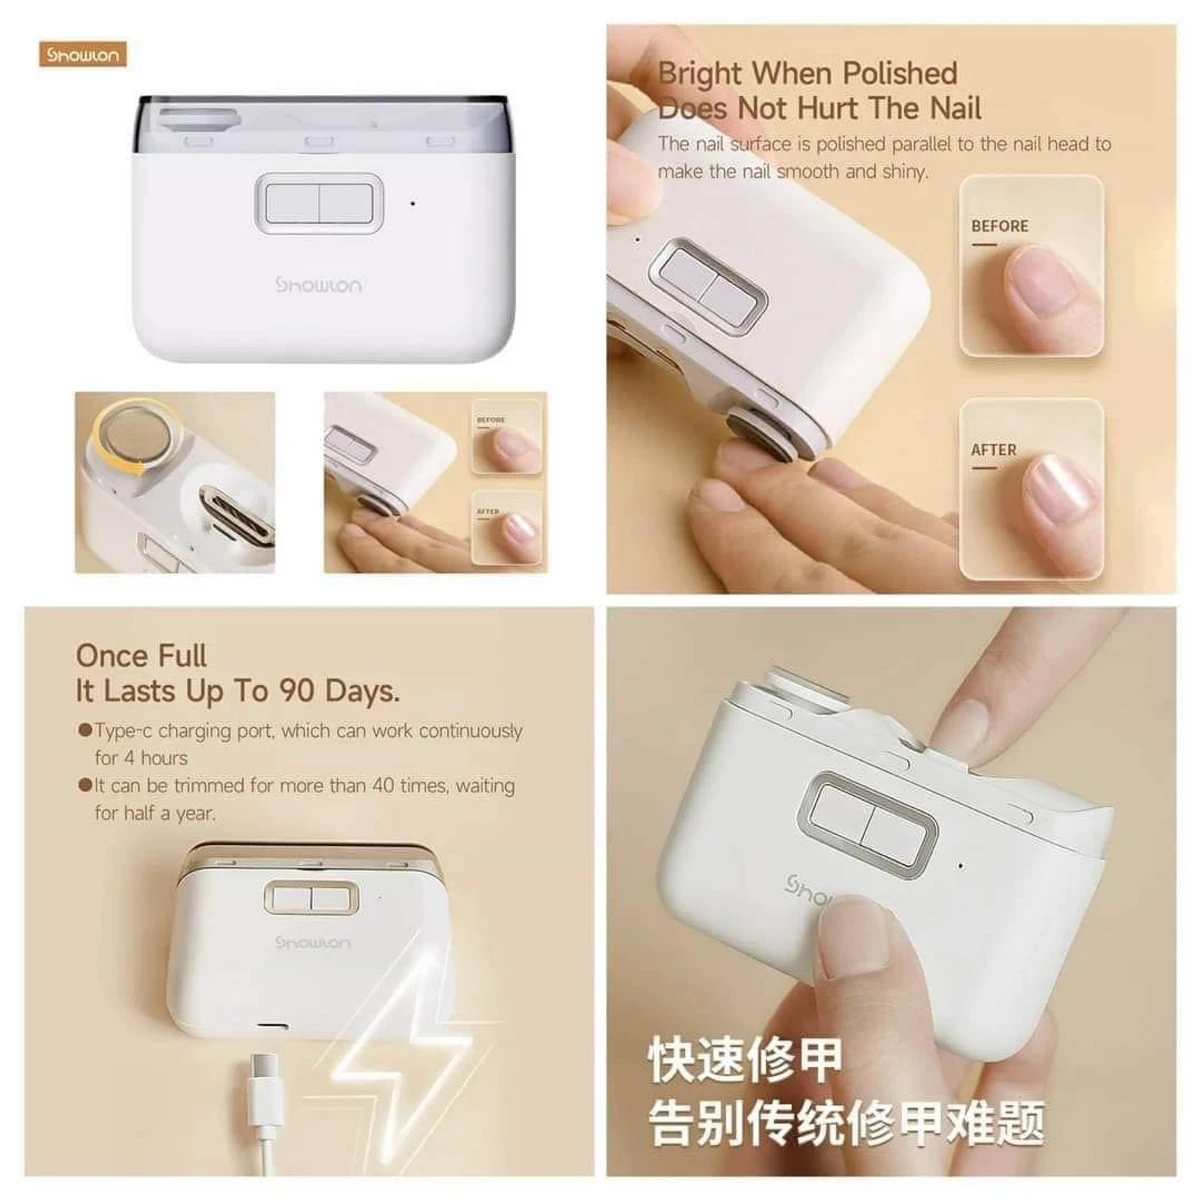 Xiaomi Showlon electric rechargeable nail clipper with polisher